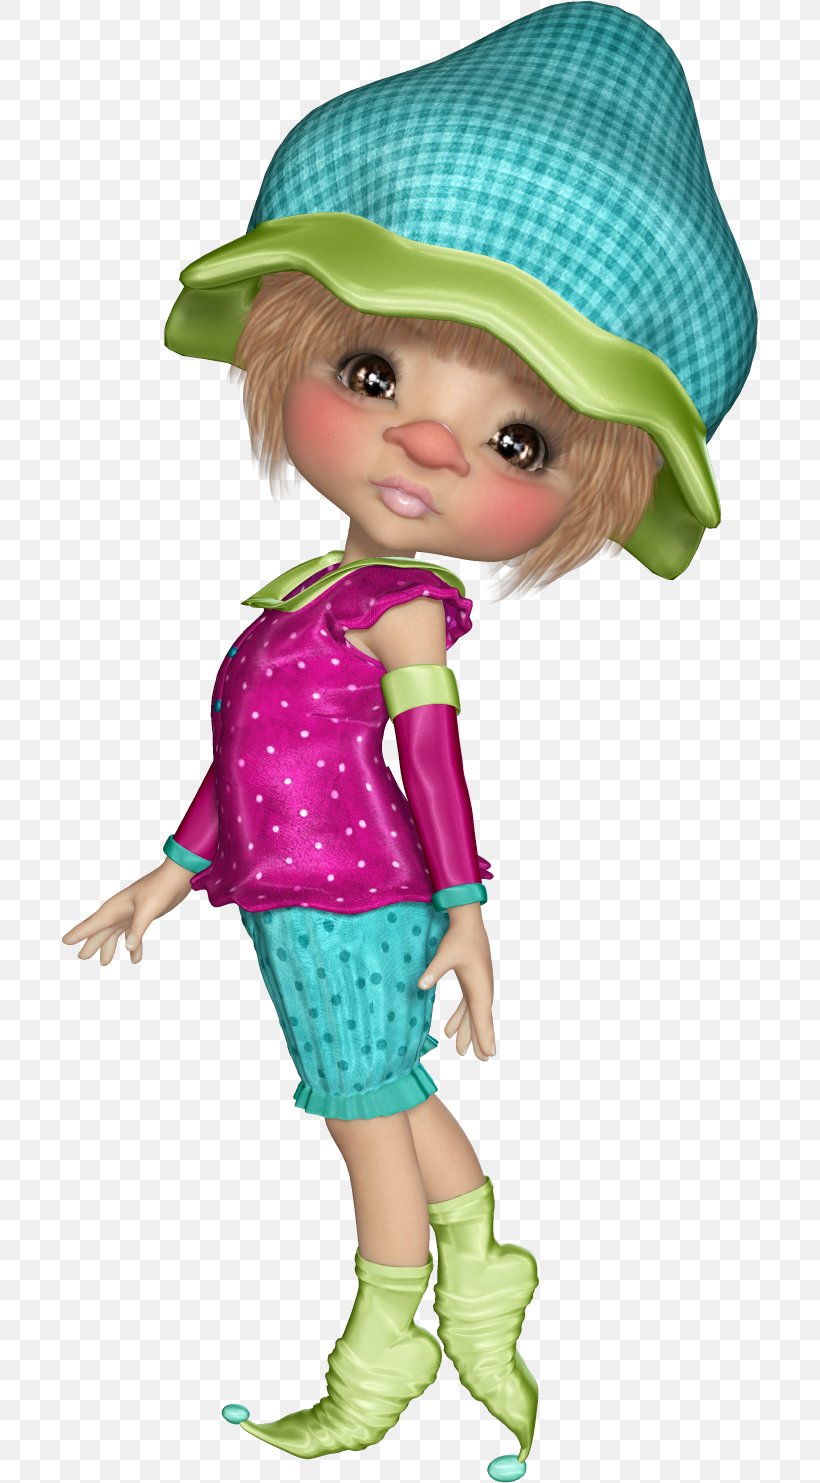 Doll Toddler Figurine Cartoon, PNG, 696x1483px, Doll, Cartoon, Character, Child, Fiction Download Free